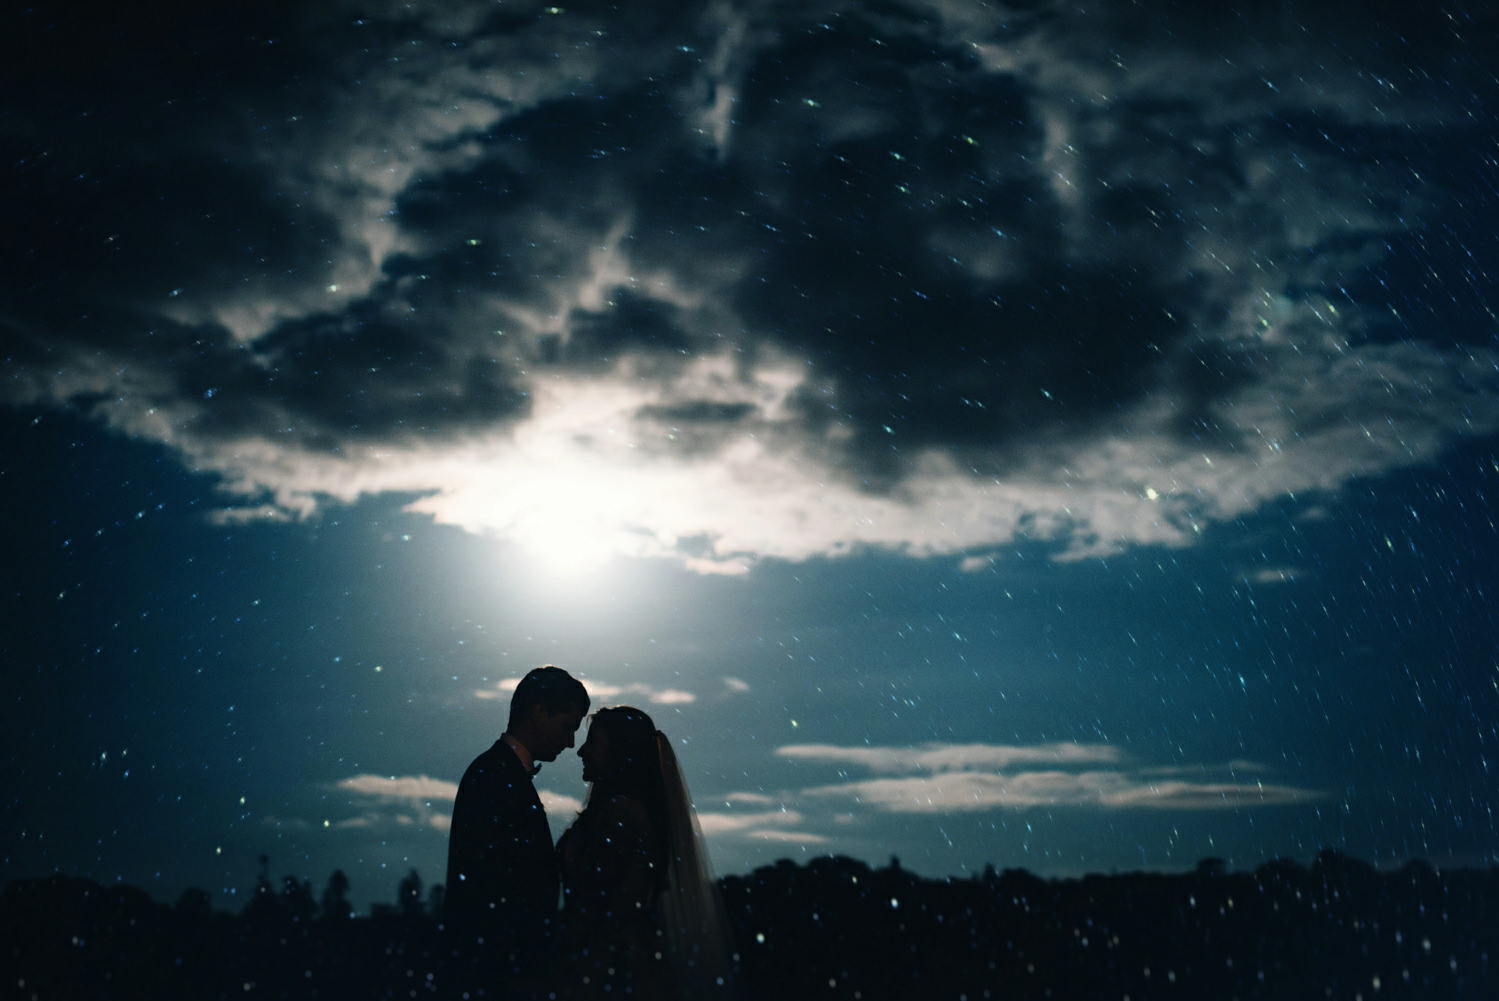 AWESOME night time wedding photos — Simple Tapestry | Creative Wedding ...